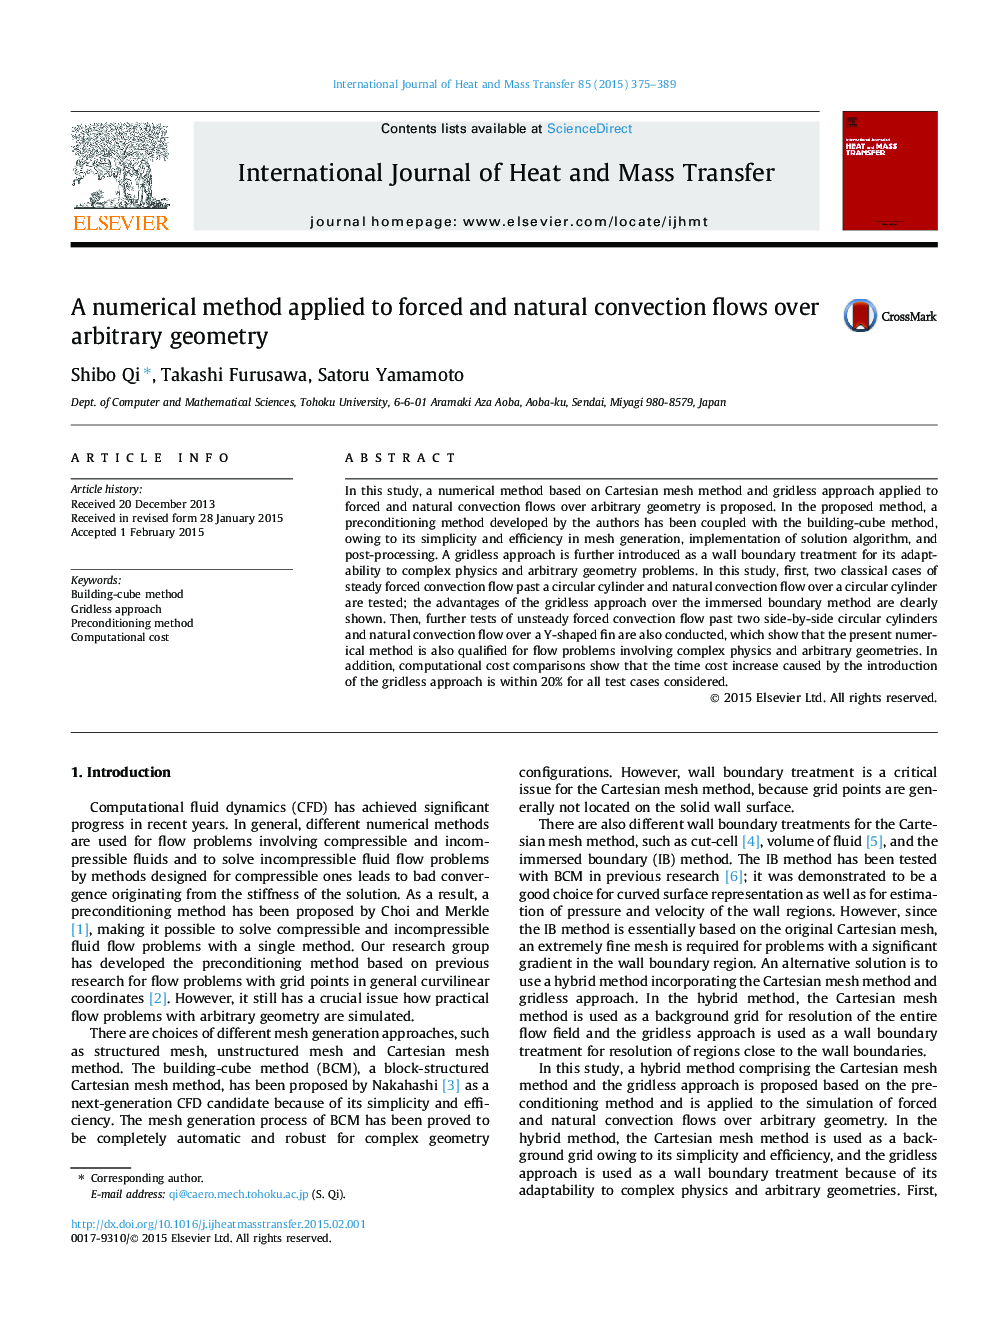 A numerical method applied to forced and natural convection flows over arbitrary geometry